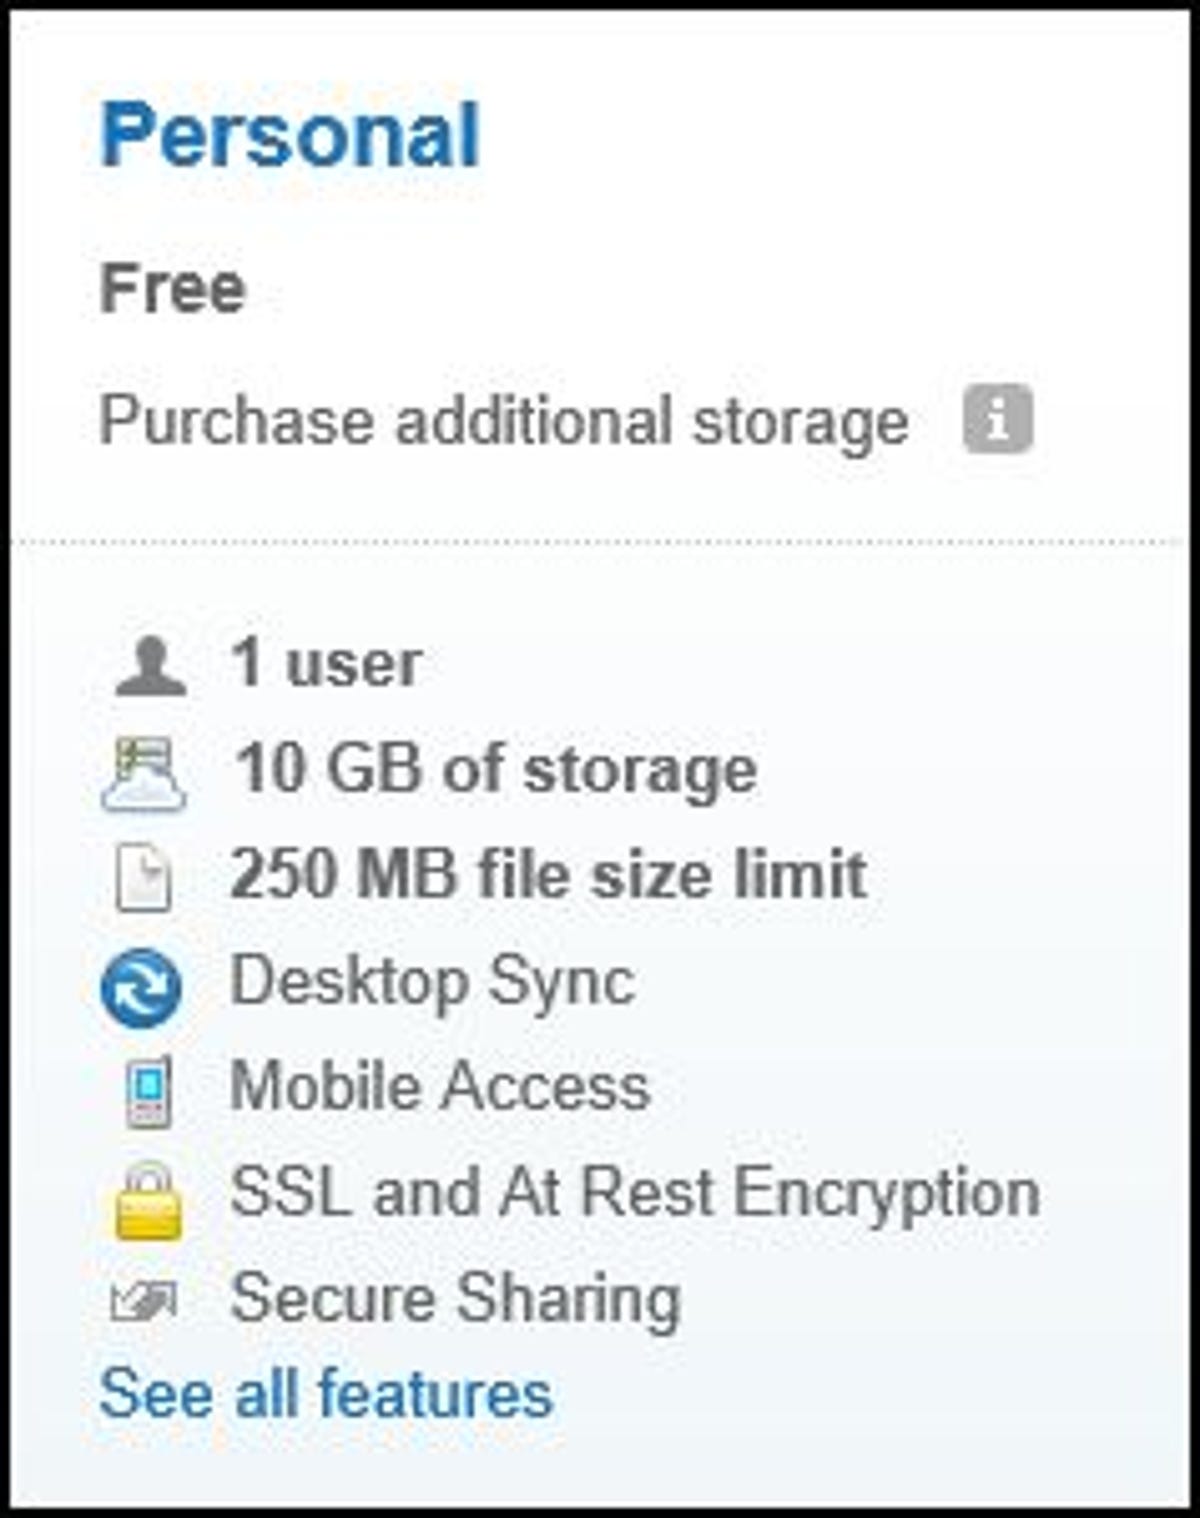 A free Box account starts you with 10GB. Installing the iOS app bumps you to 50GB.